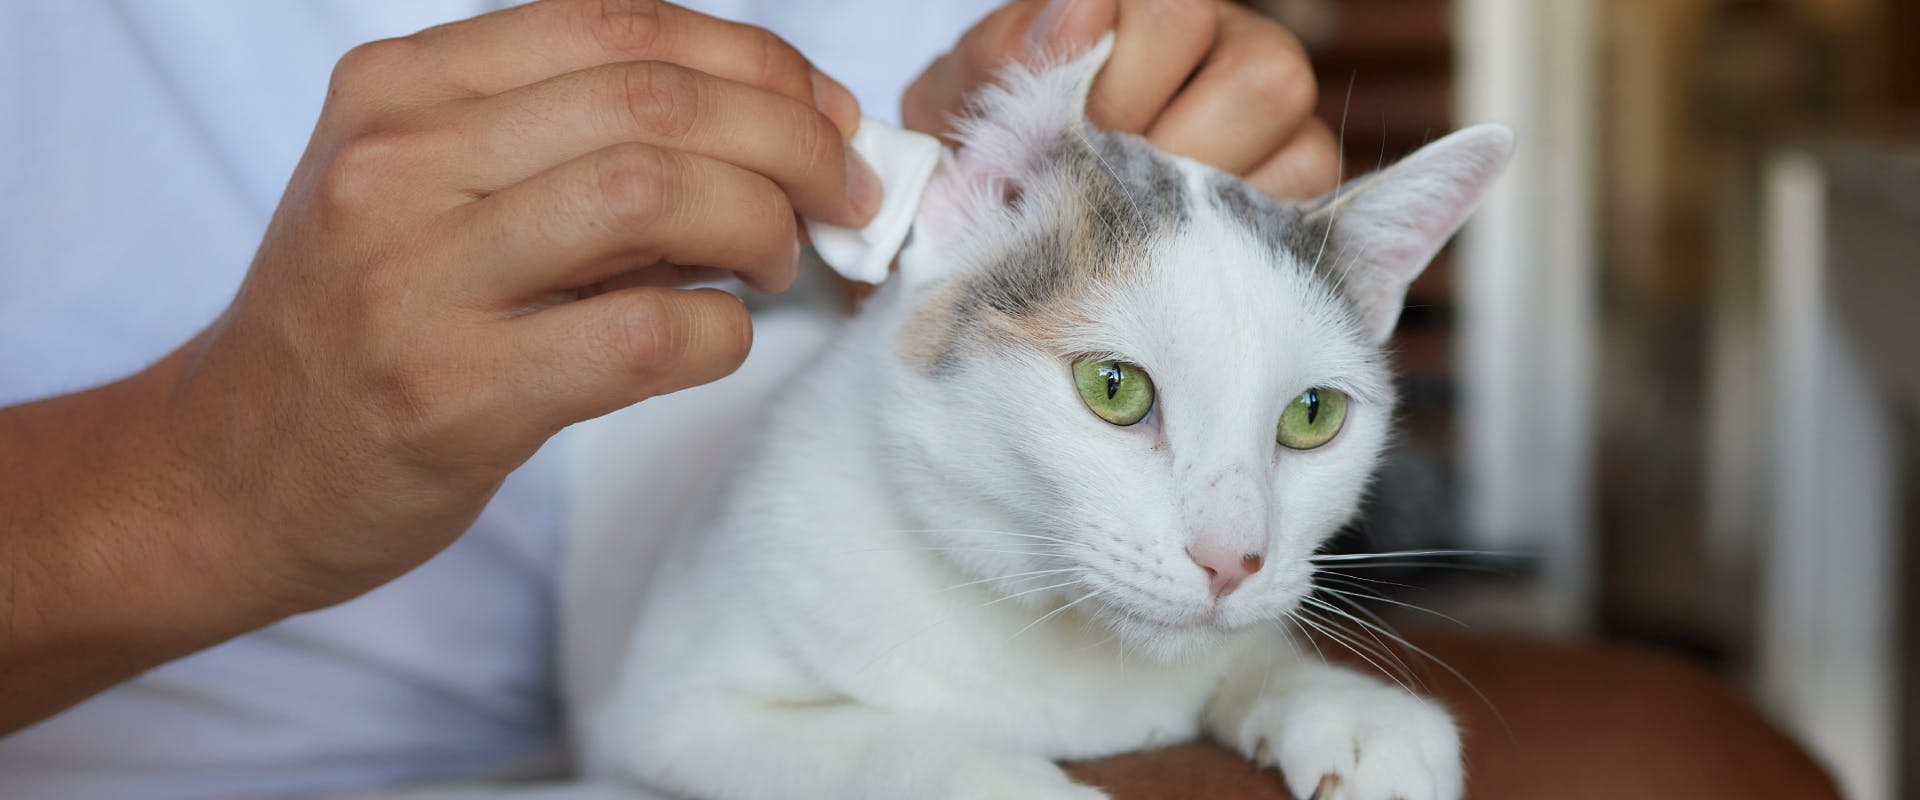 calico cat having its ear cleaned by a vet